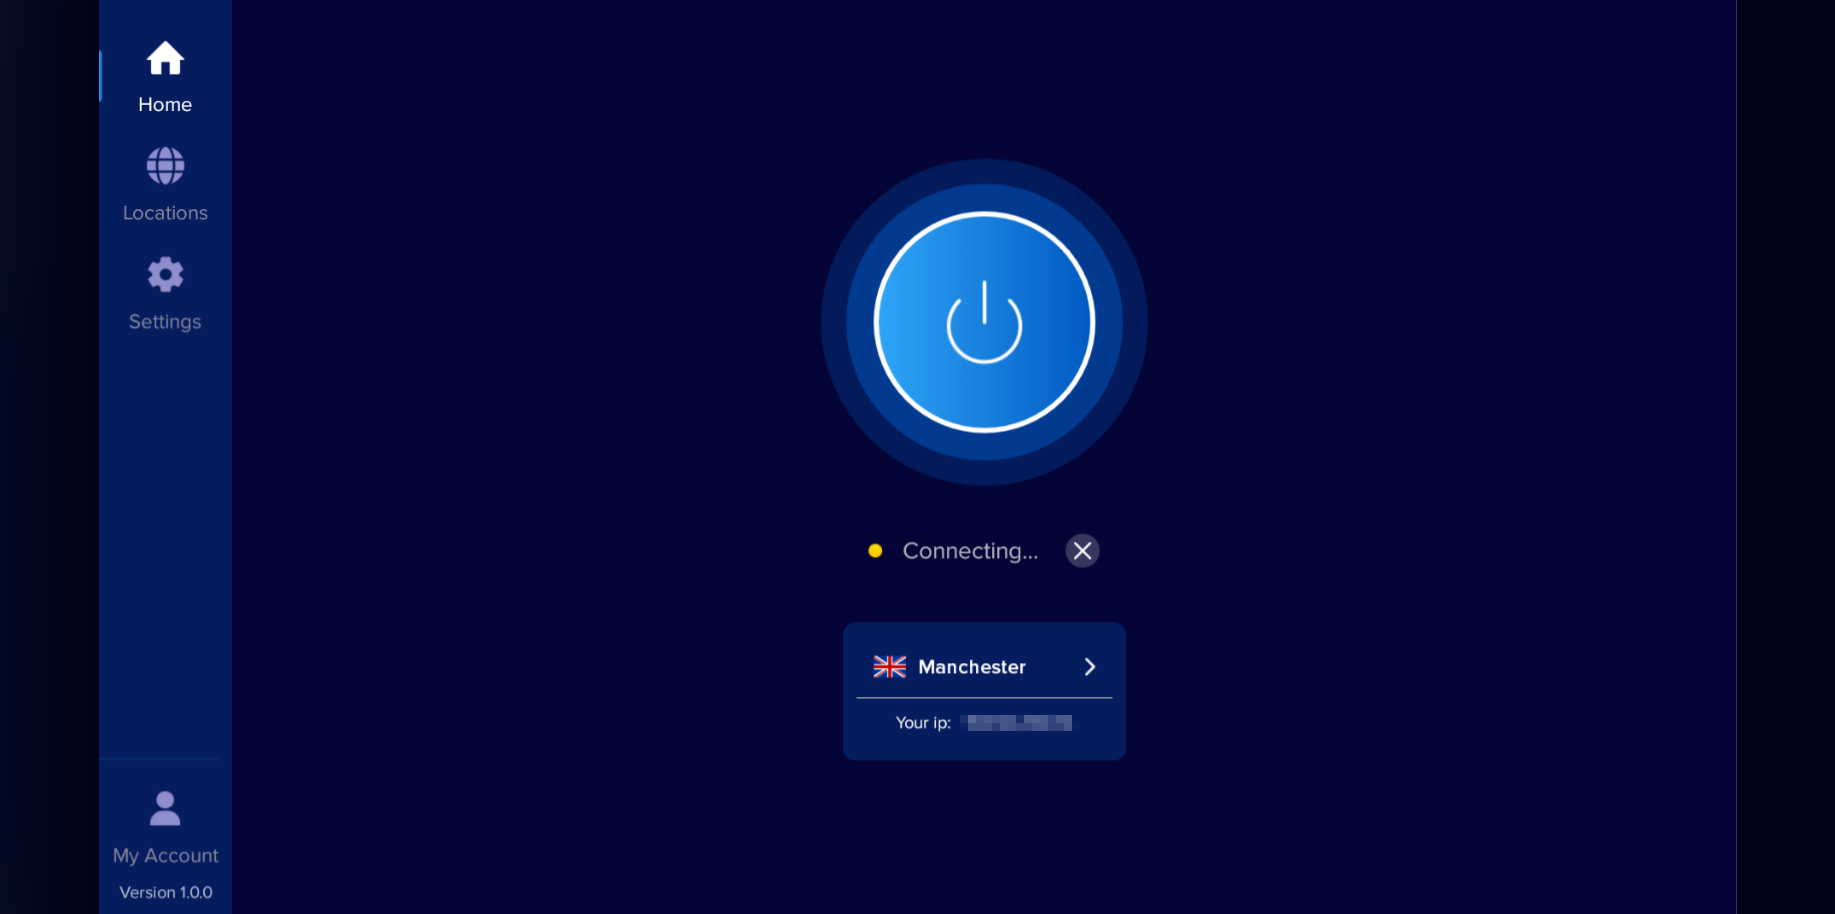 How to install and use VPN for Firestick? Sixth step - Choose a location and click Connect. 